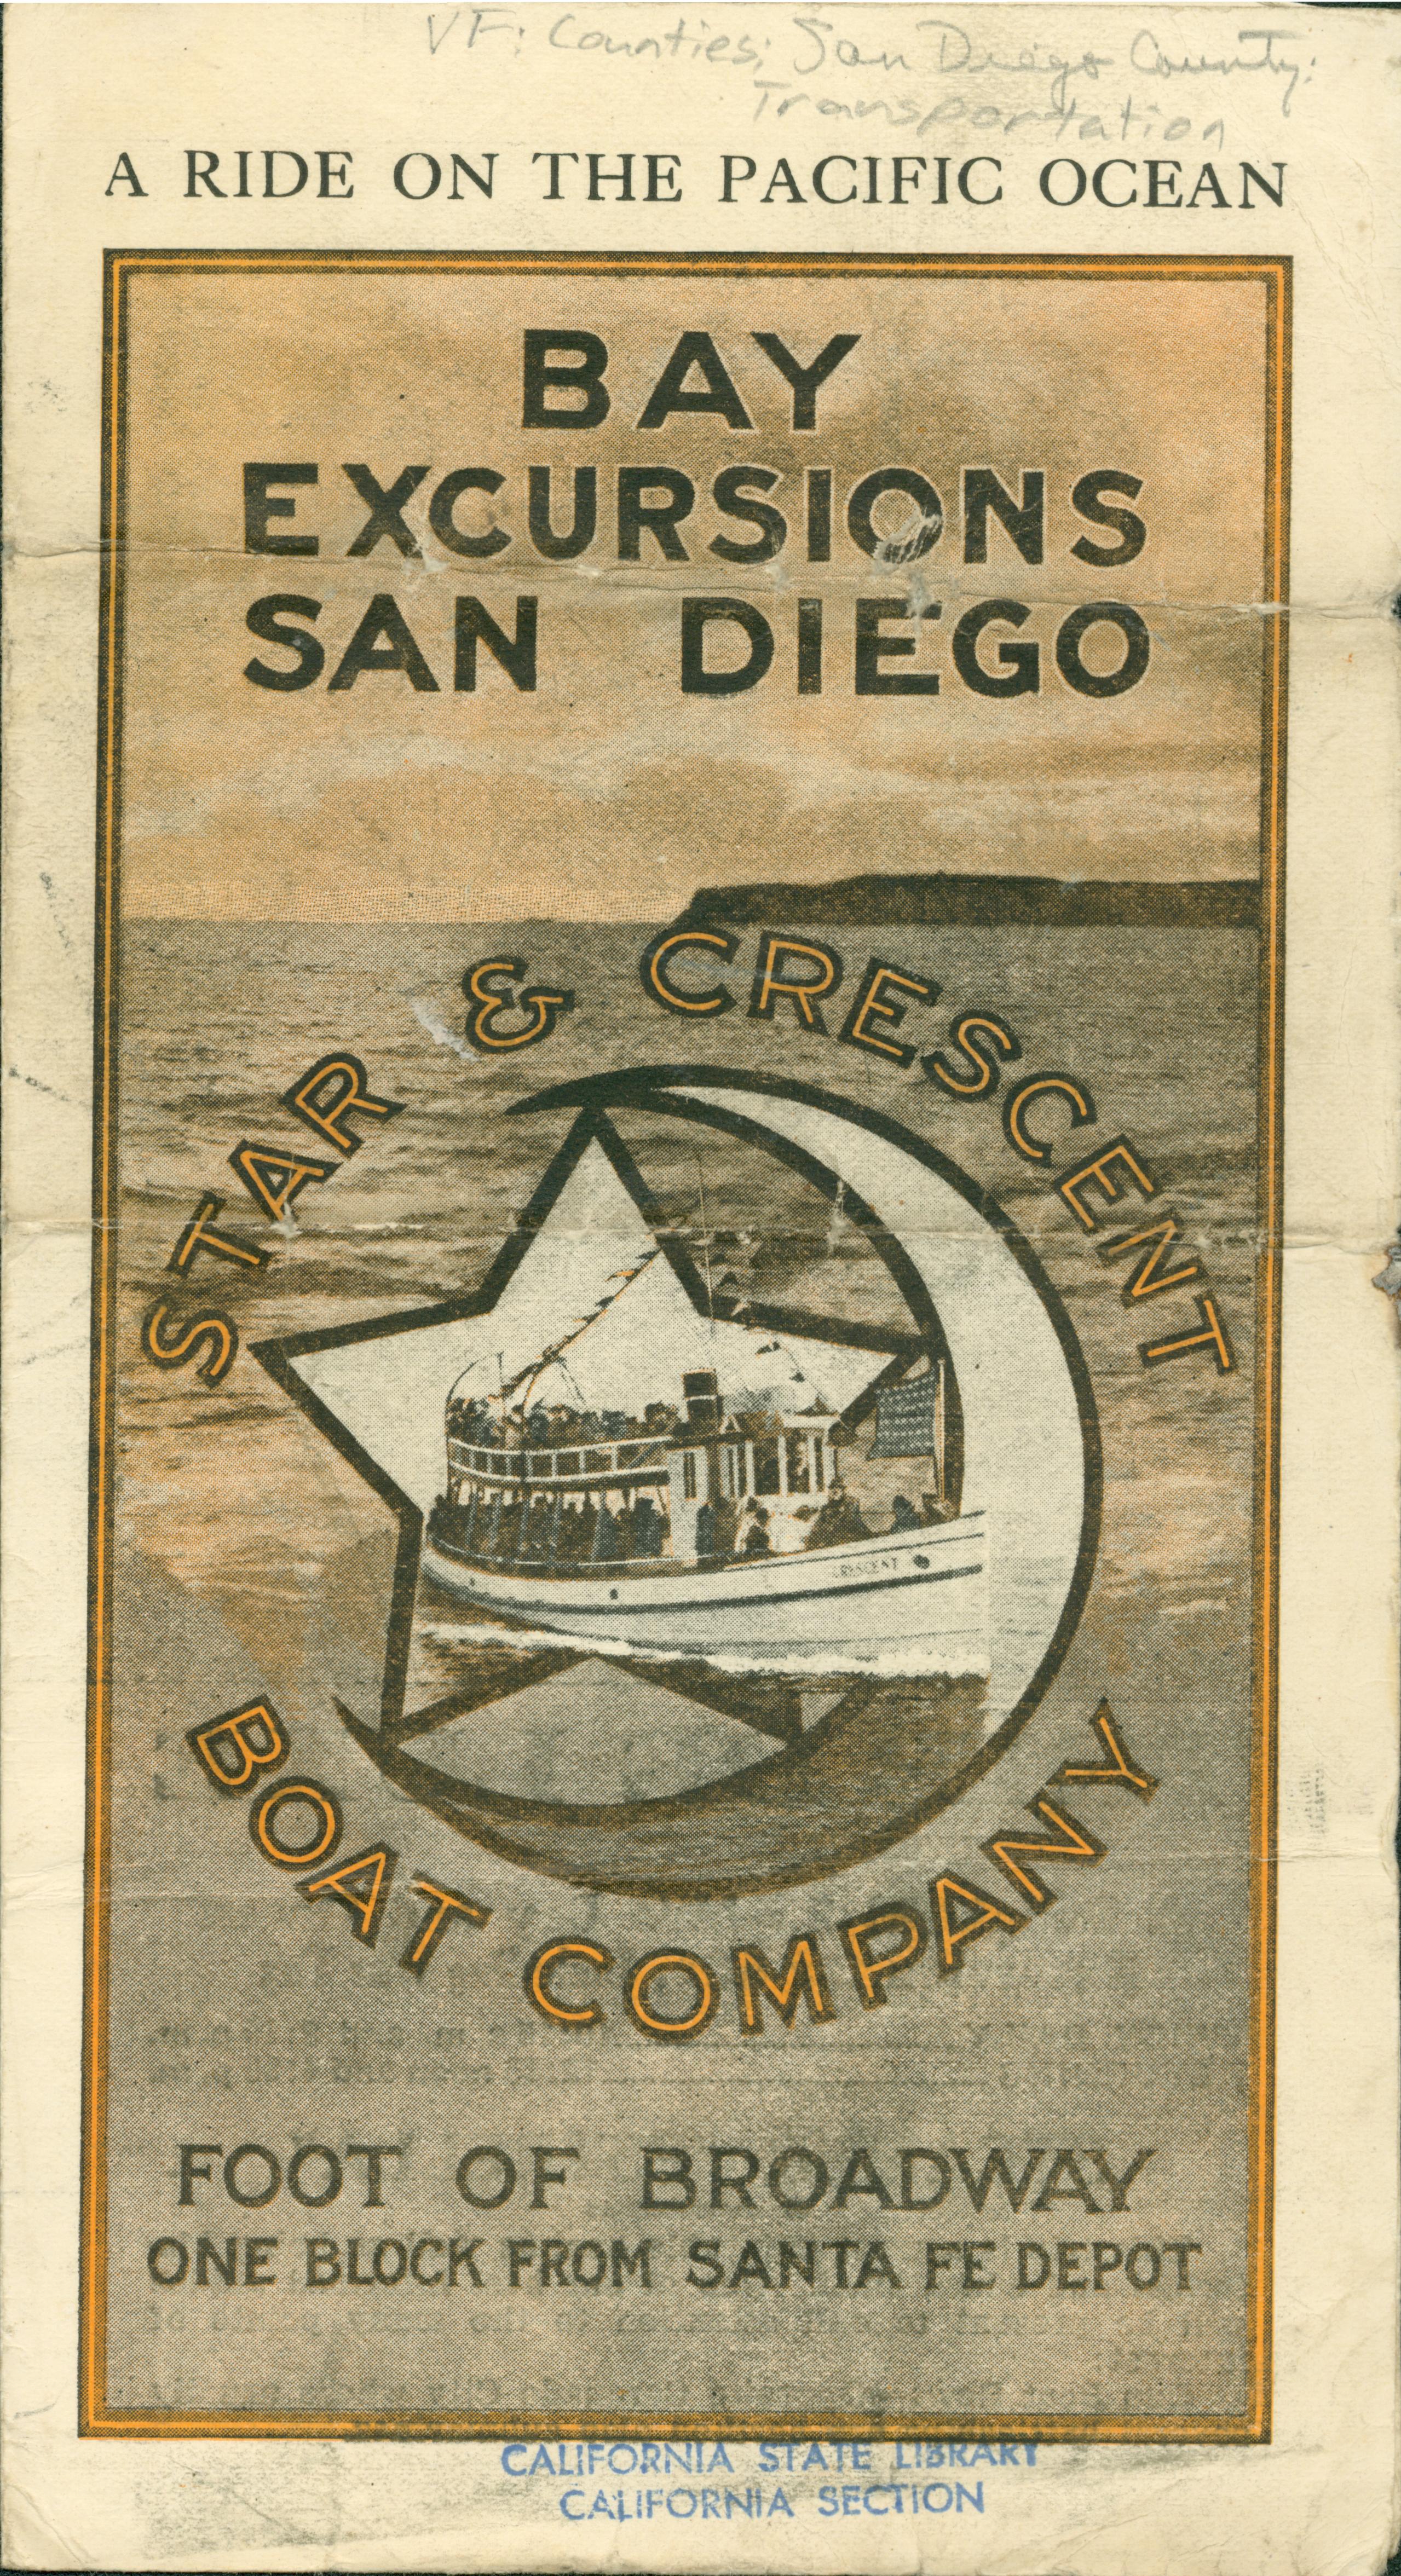 The front of this brochure shows the Star and Crescent Boat Company logo, with a ship sailing out of it, against a backdrop of the San Diego bay.